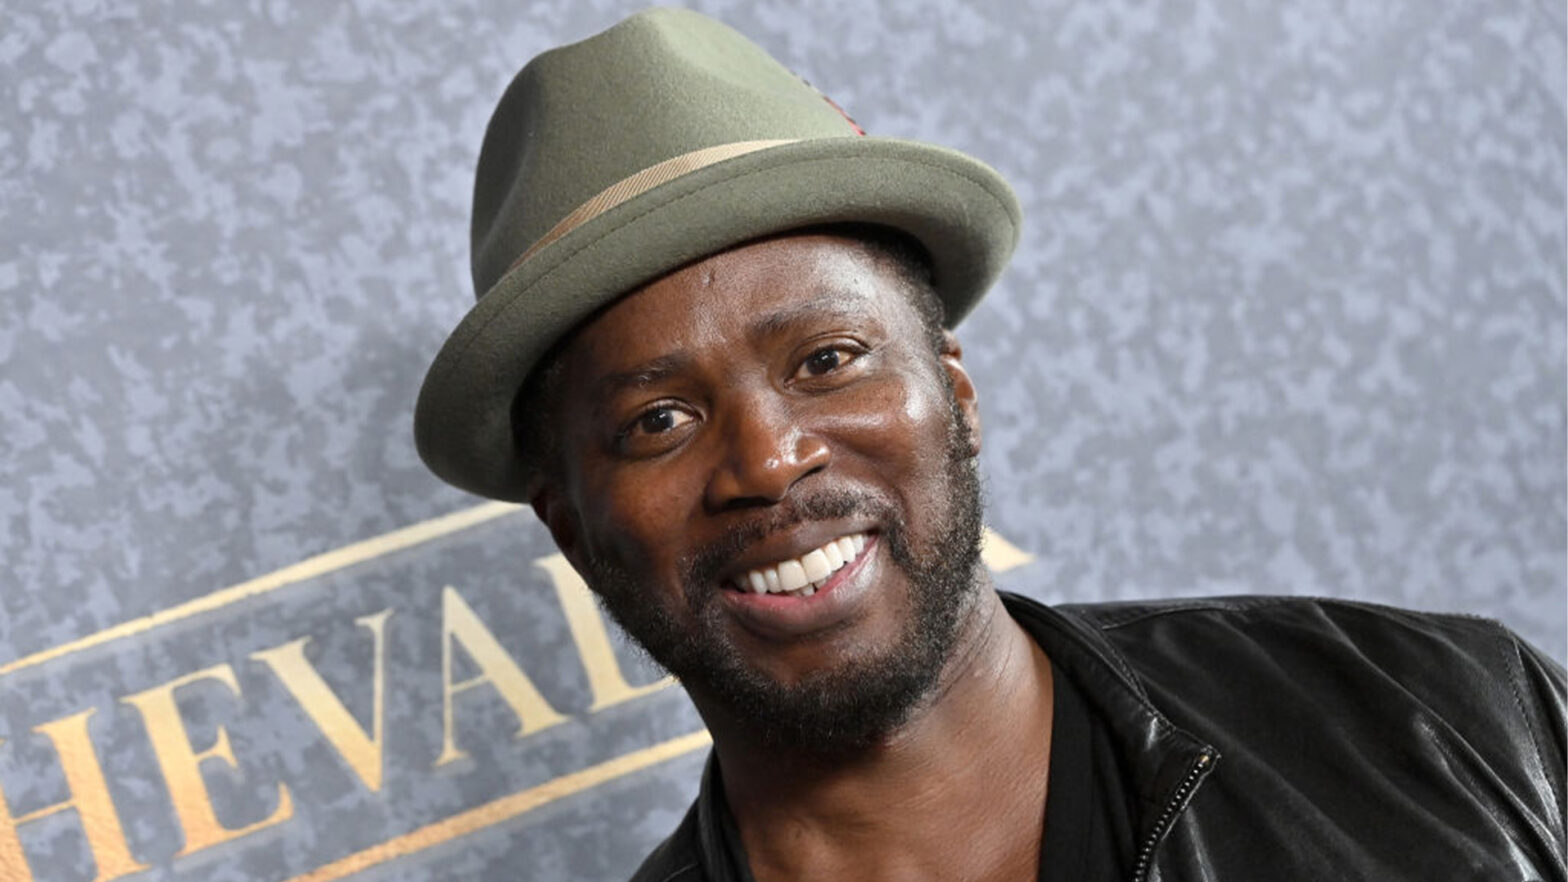 Harold Perrineau Reveals He And Other 'Lost' Cast Members Sought Equal Pay, But Top Earners Were 'Solely' White Actors